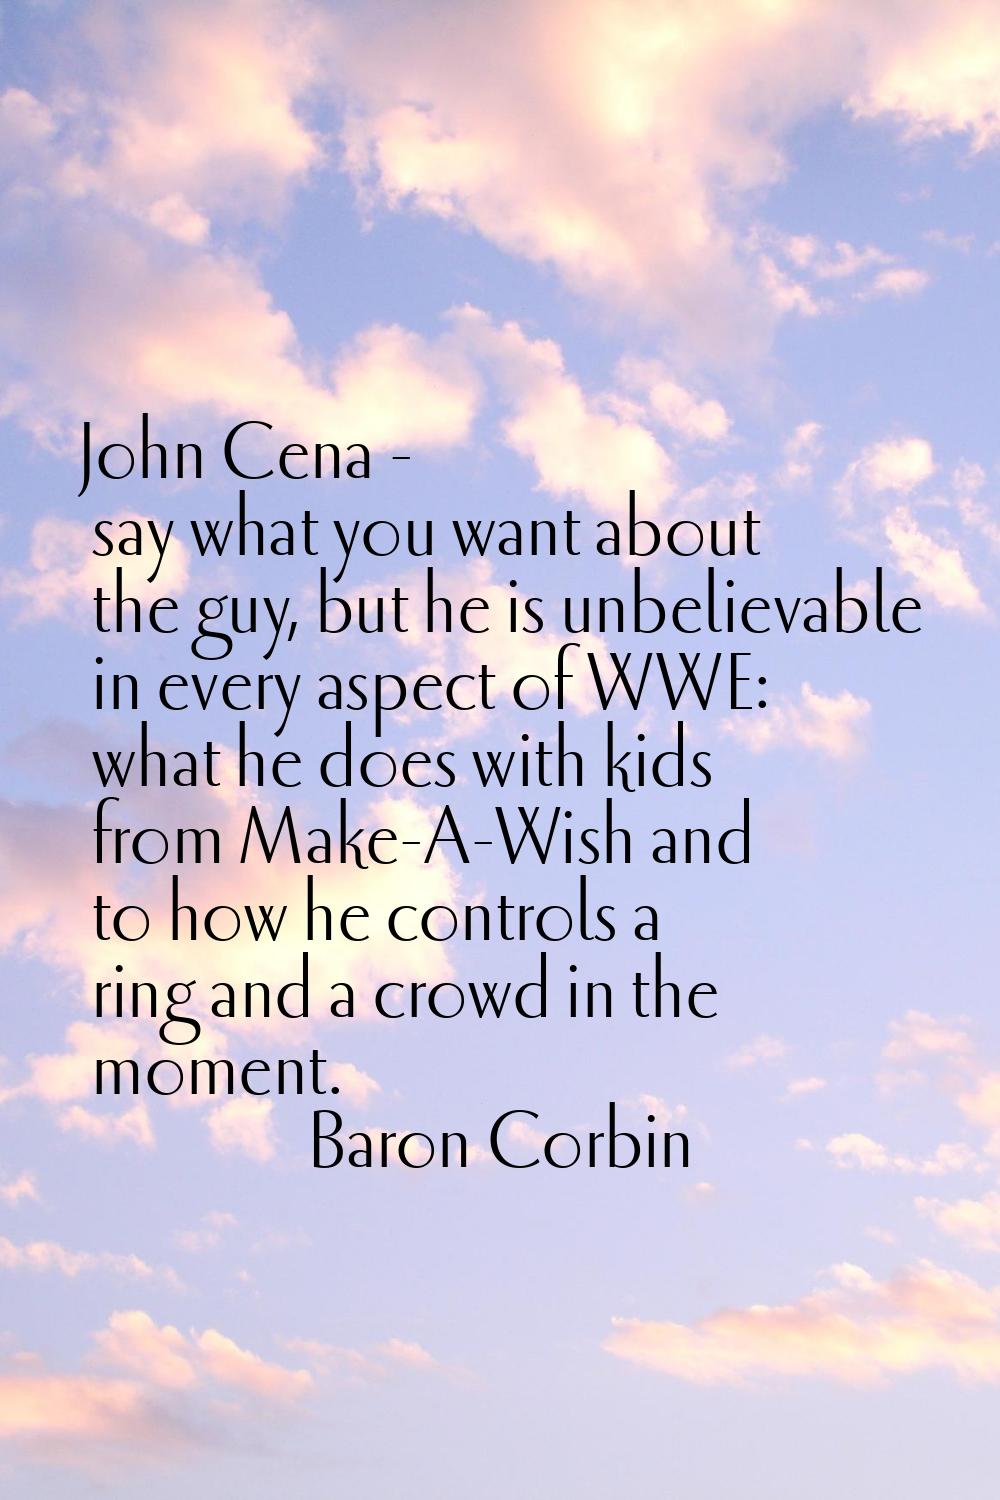 John Cena - say what you want about the guy, but he is unbelievable in every aspect of WWE: what he